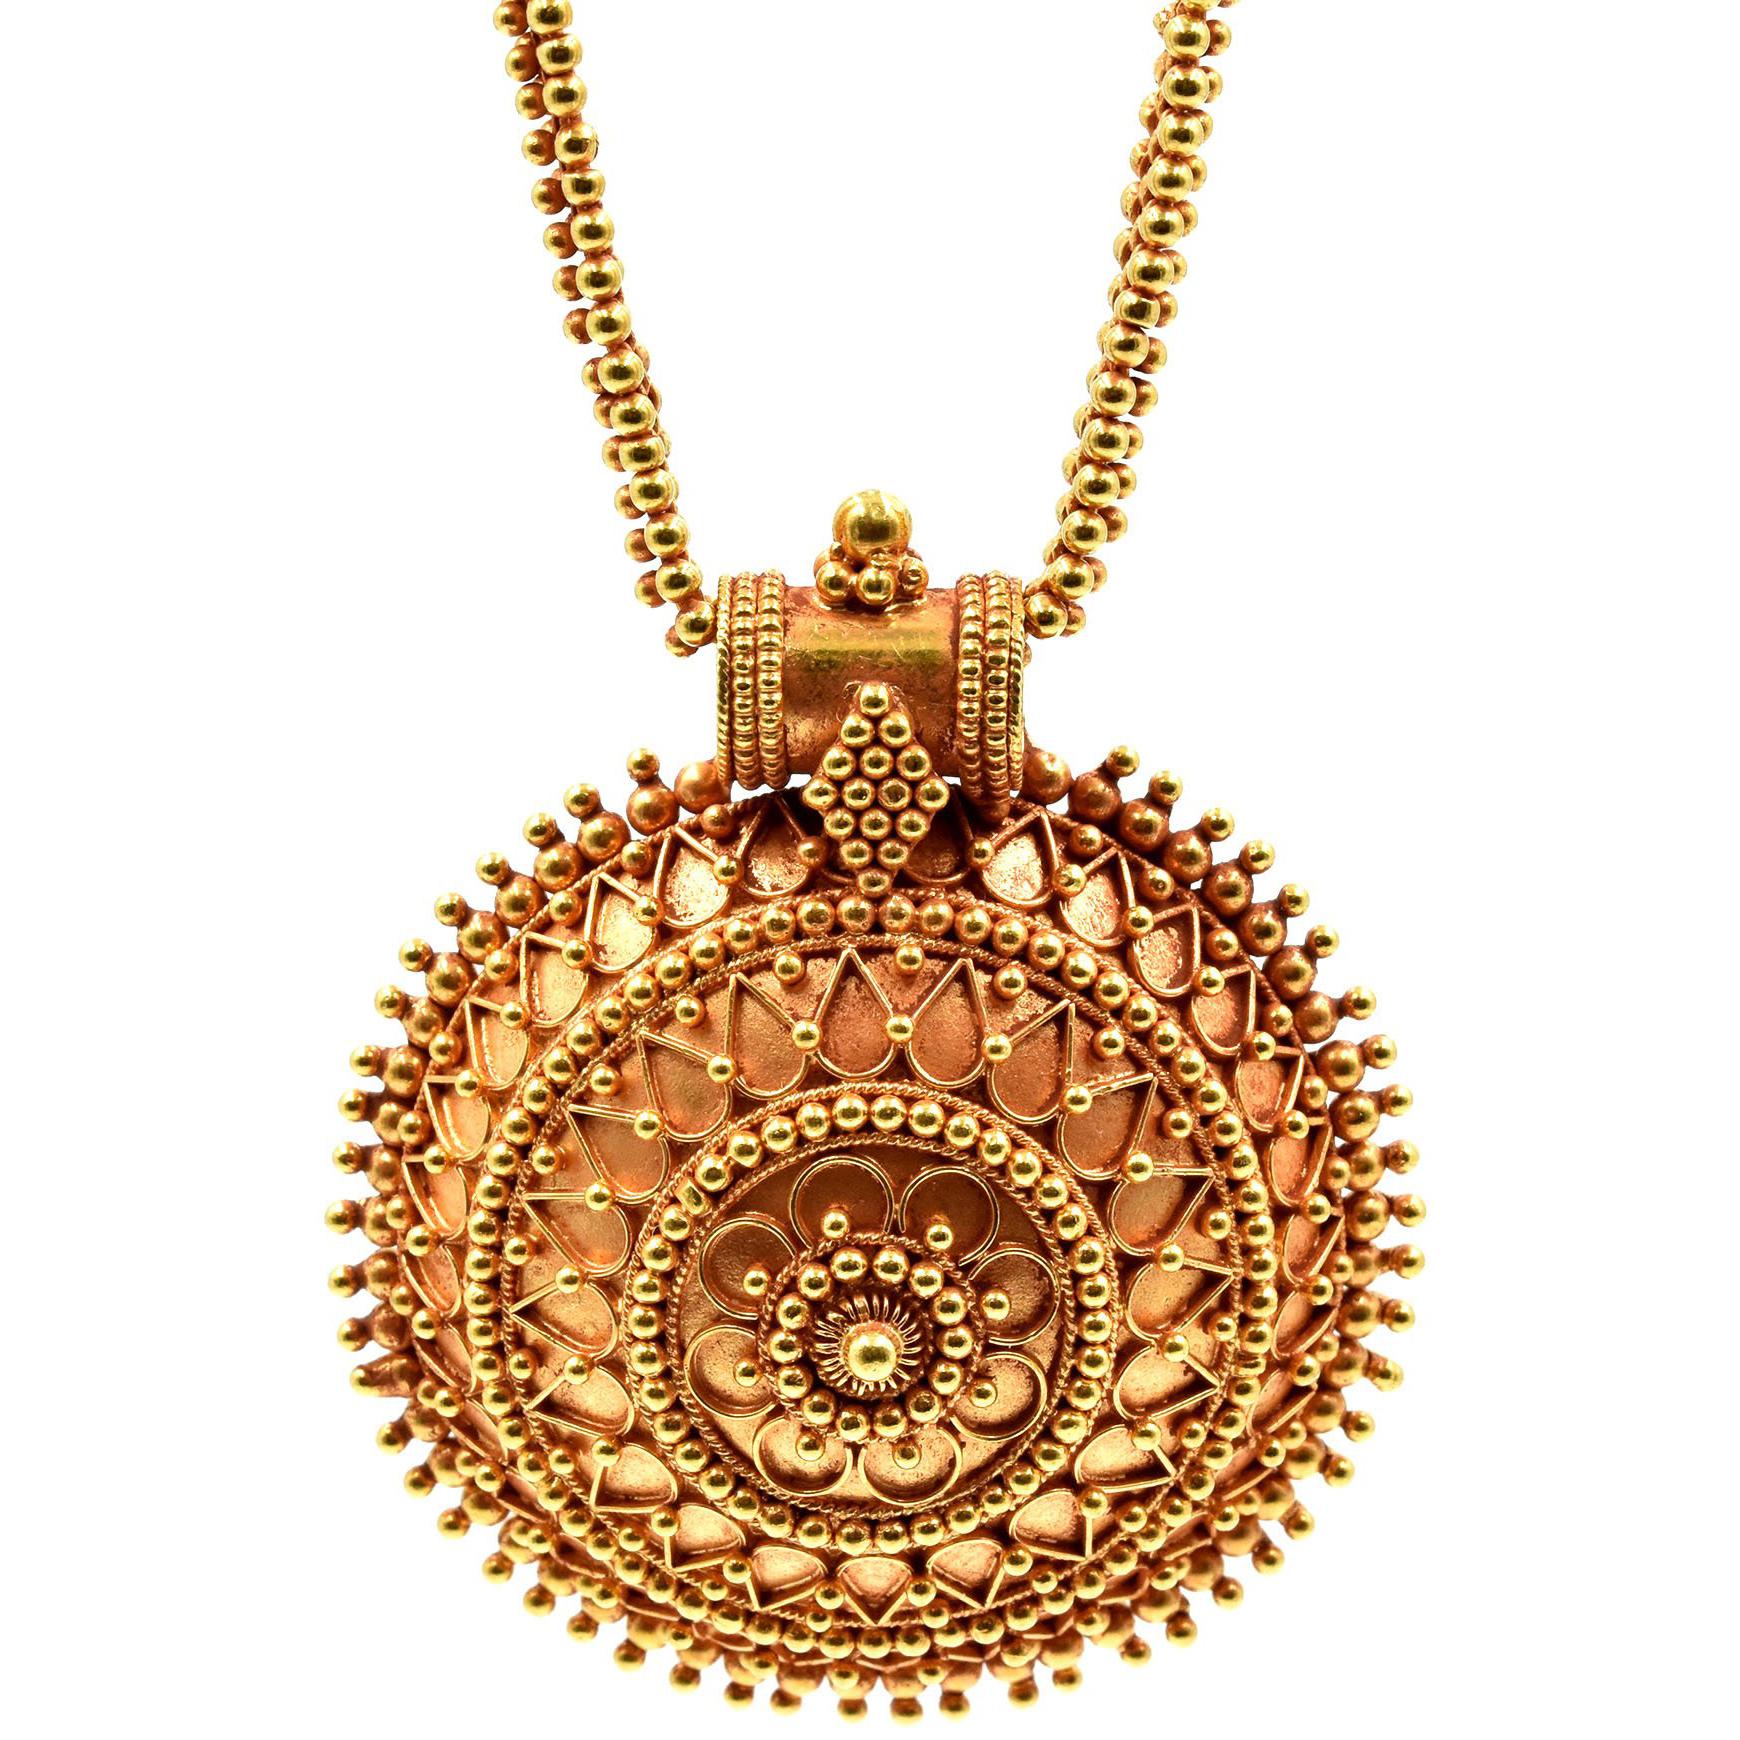 22 Karat Yellow Gold, India Style Necklace with Domed Pendant, 55.2 Grams